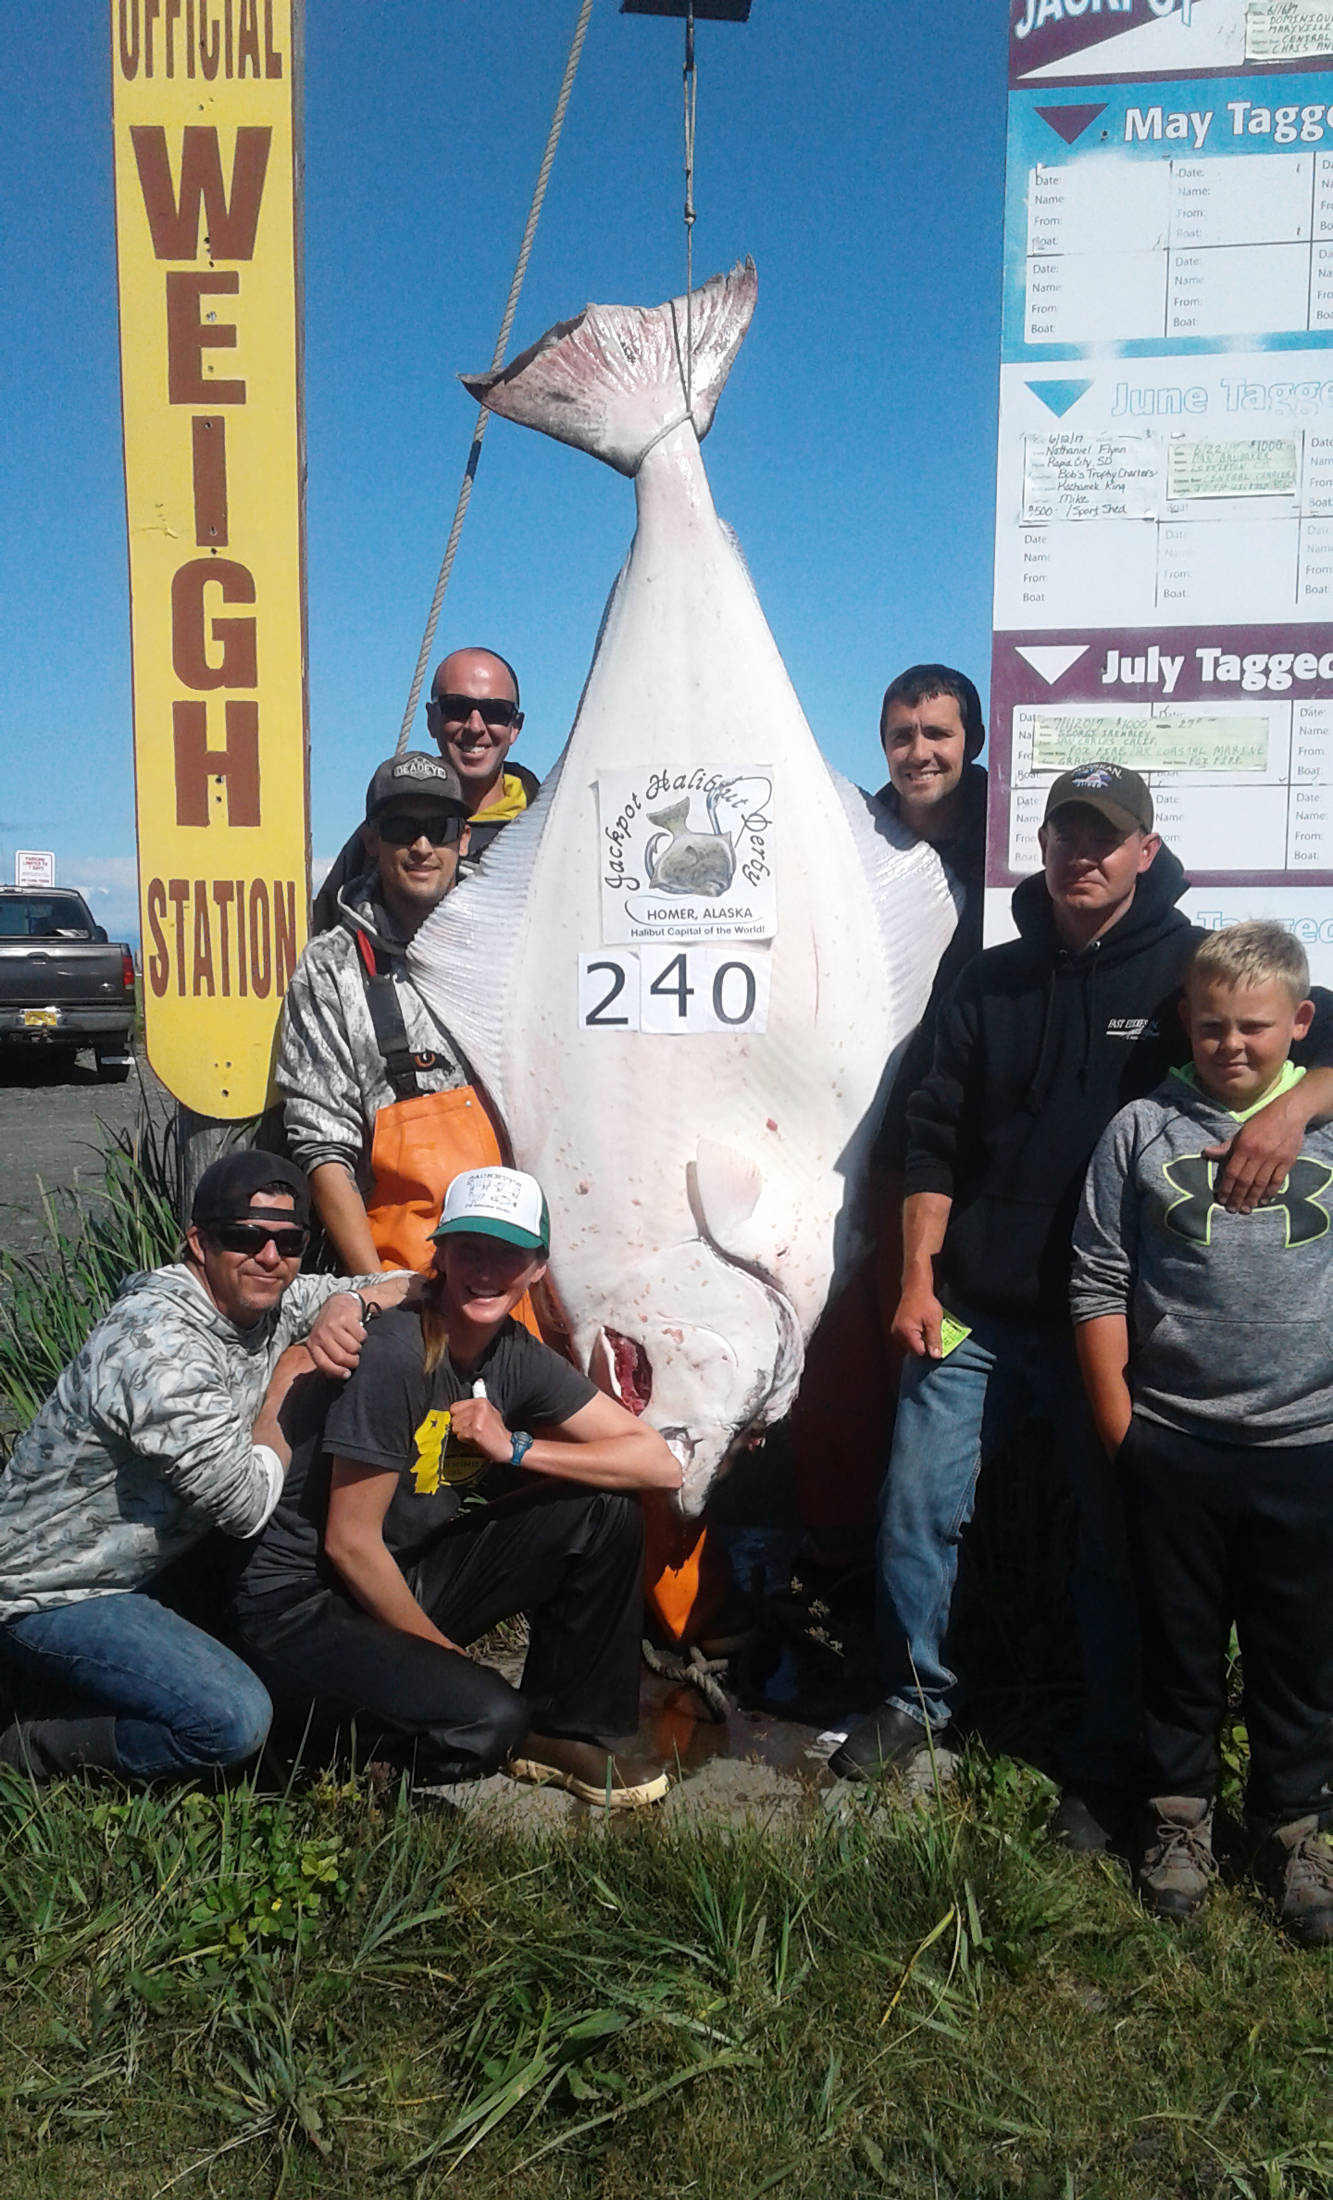 Idaho resident Jack Mills (second from right) poses with his winning 240-pound halibut along with the rest of the crew in Homer, Alaska. Mills won the 2017 Homer Jackpot Halibut Derby, and a prize for $15,241.10. (Photo courtesy Homer Chamber of Commerce and Visitor Center)